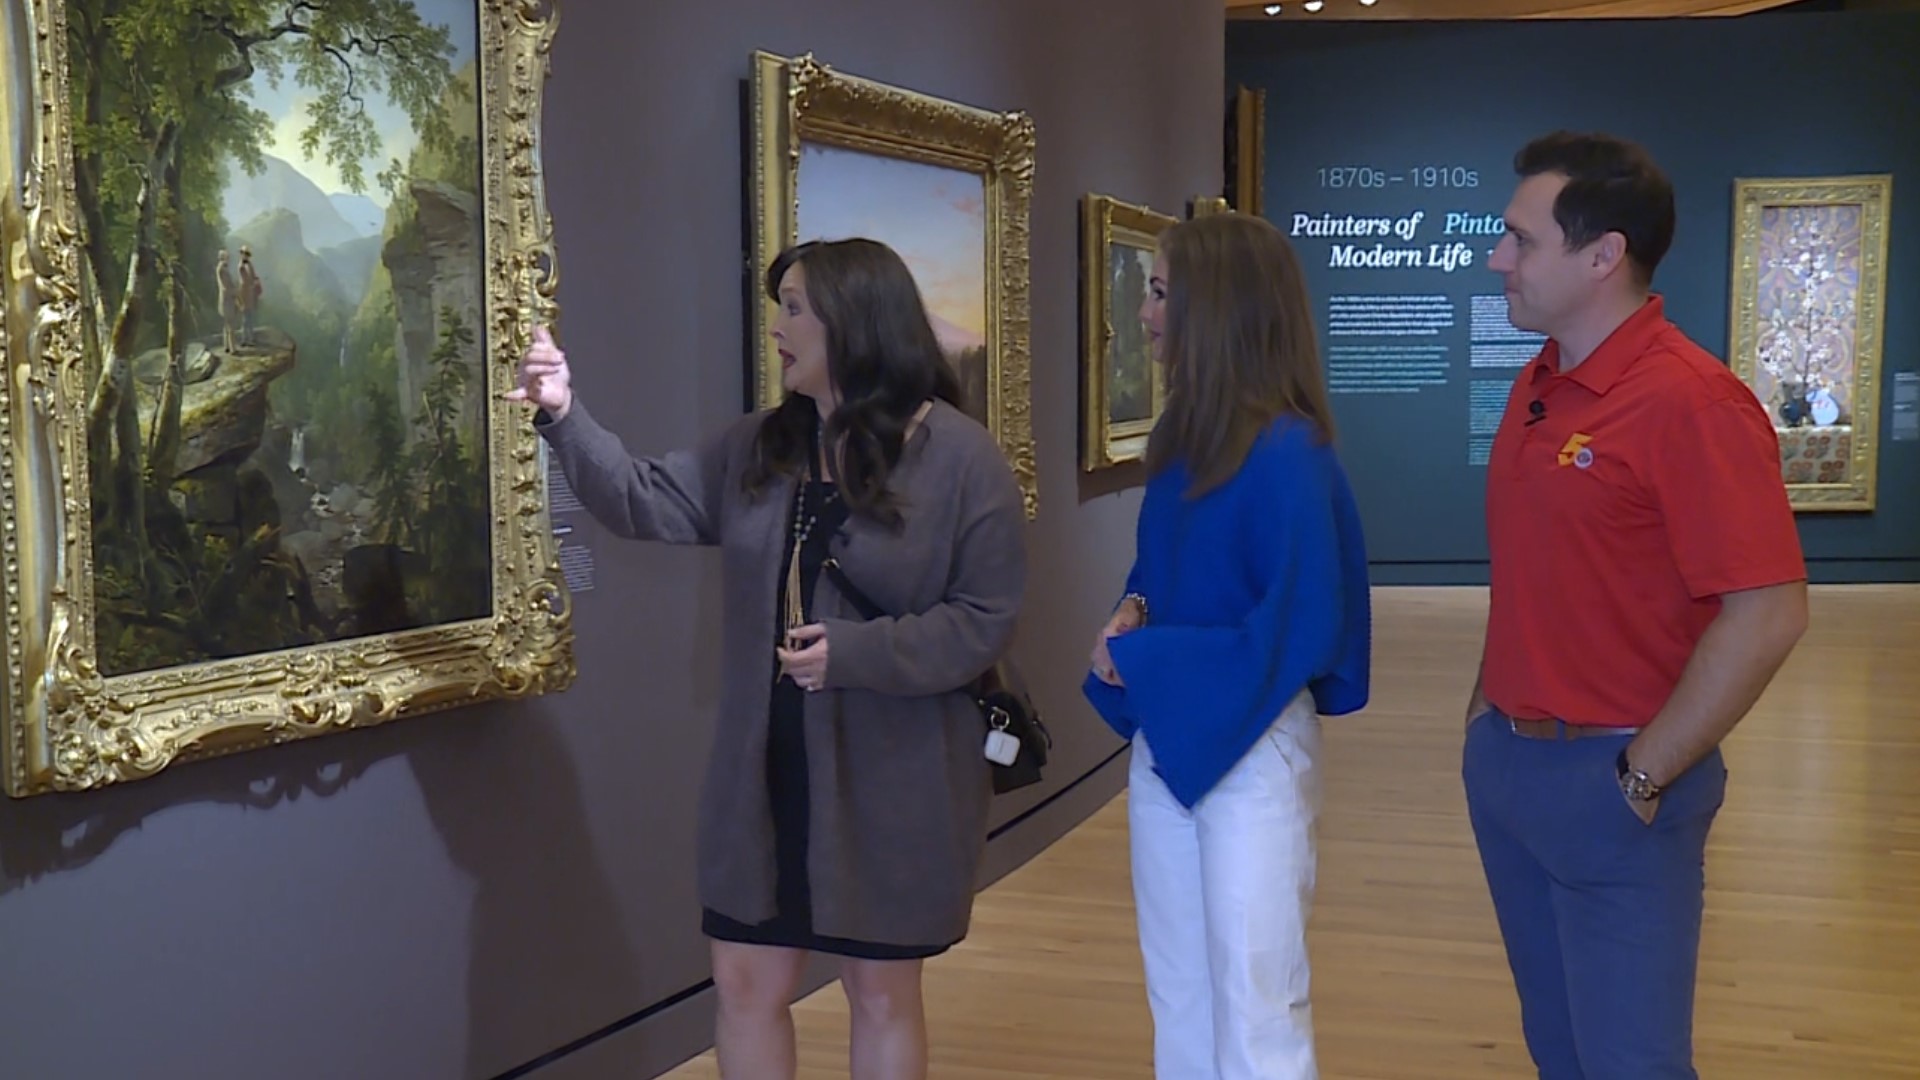 For this episode of Around the Corner, 5NEWS went to Crystal Bridges Museum of American Art in Bentonville. Check it out!